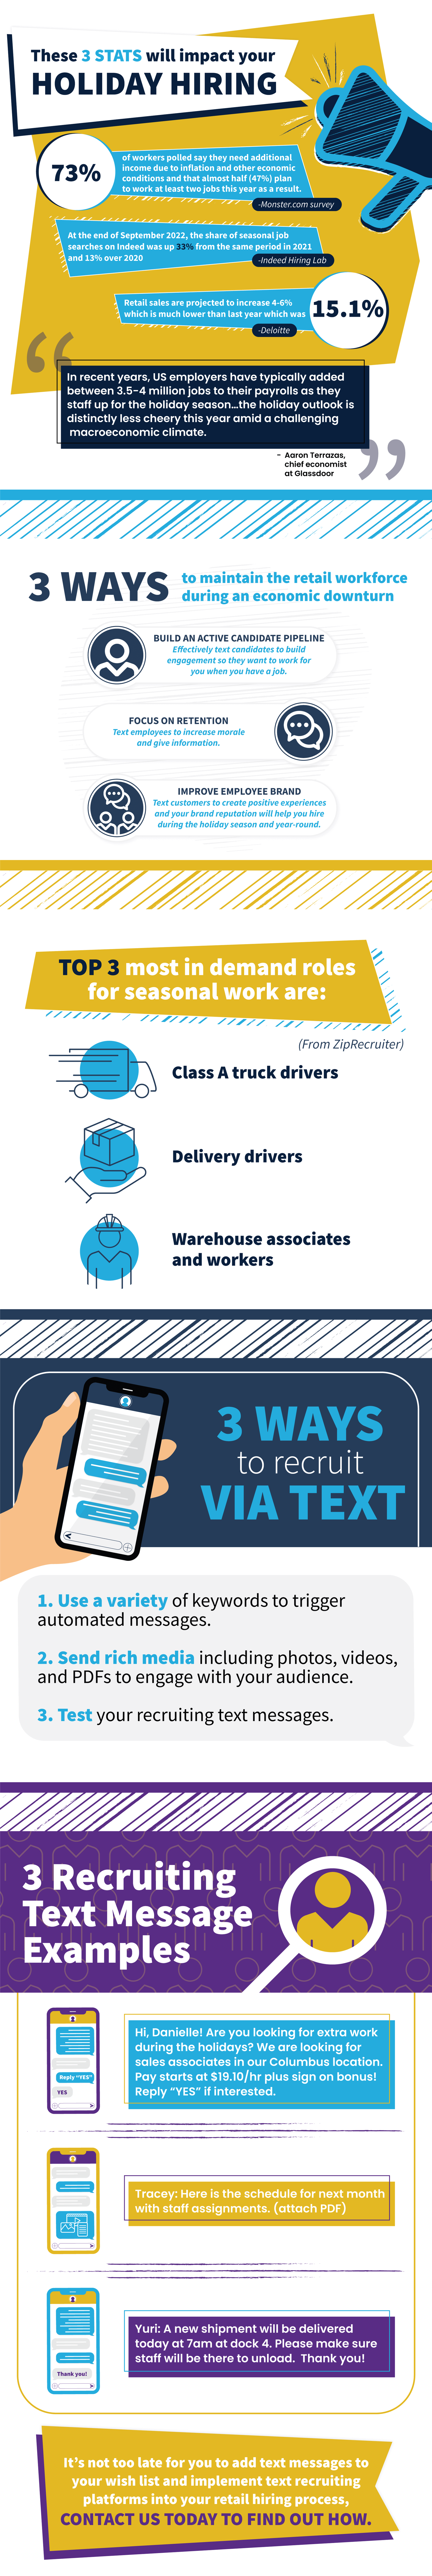 retail hiring for holidays infographic